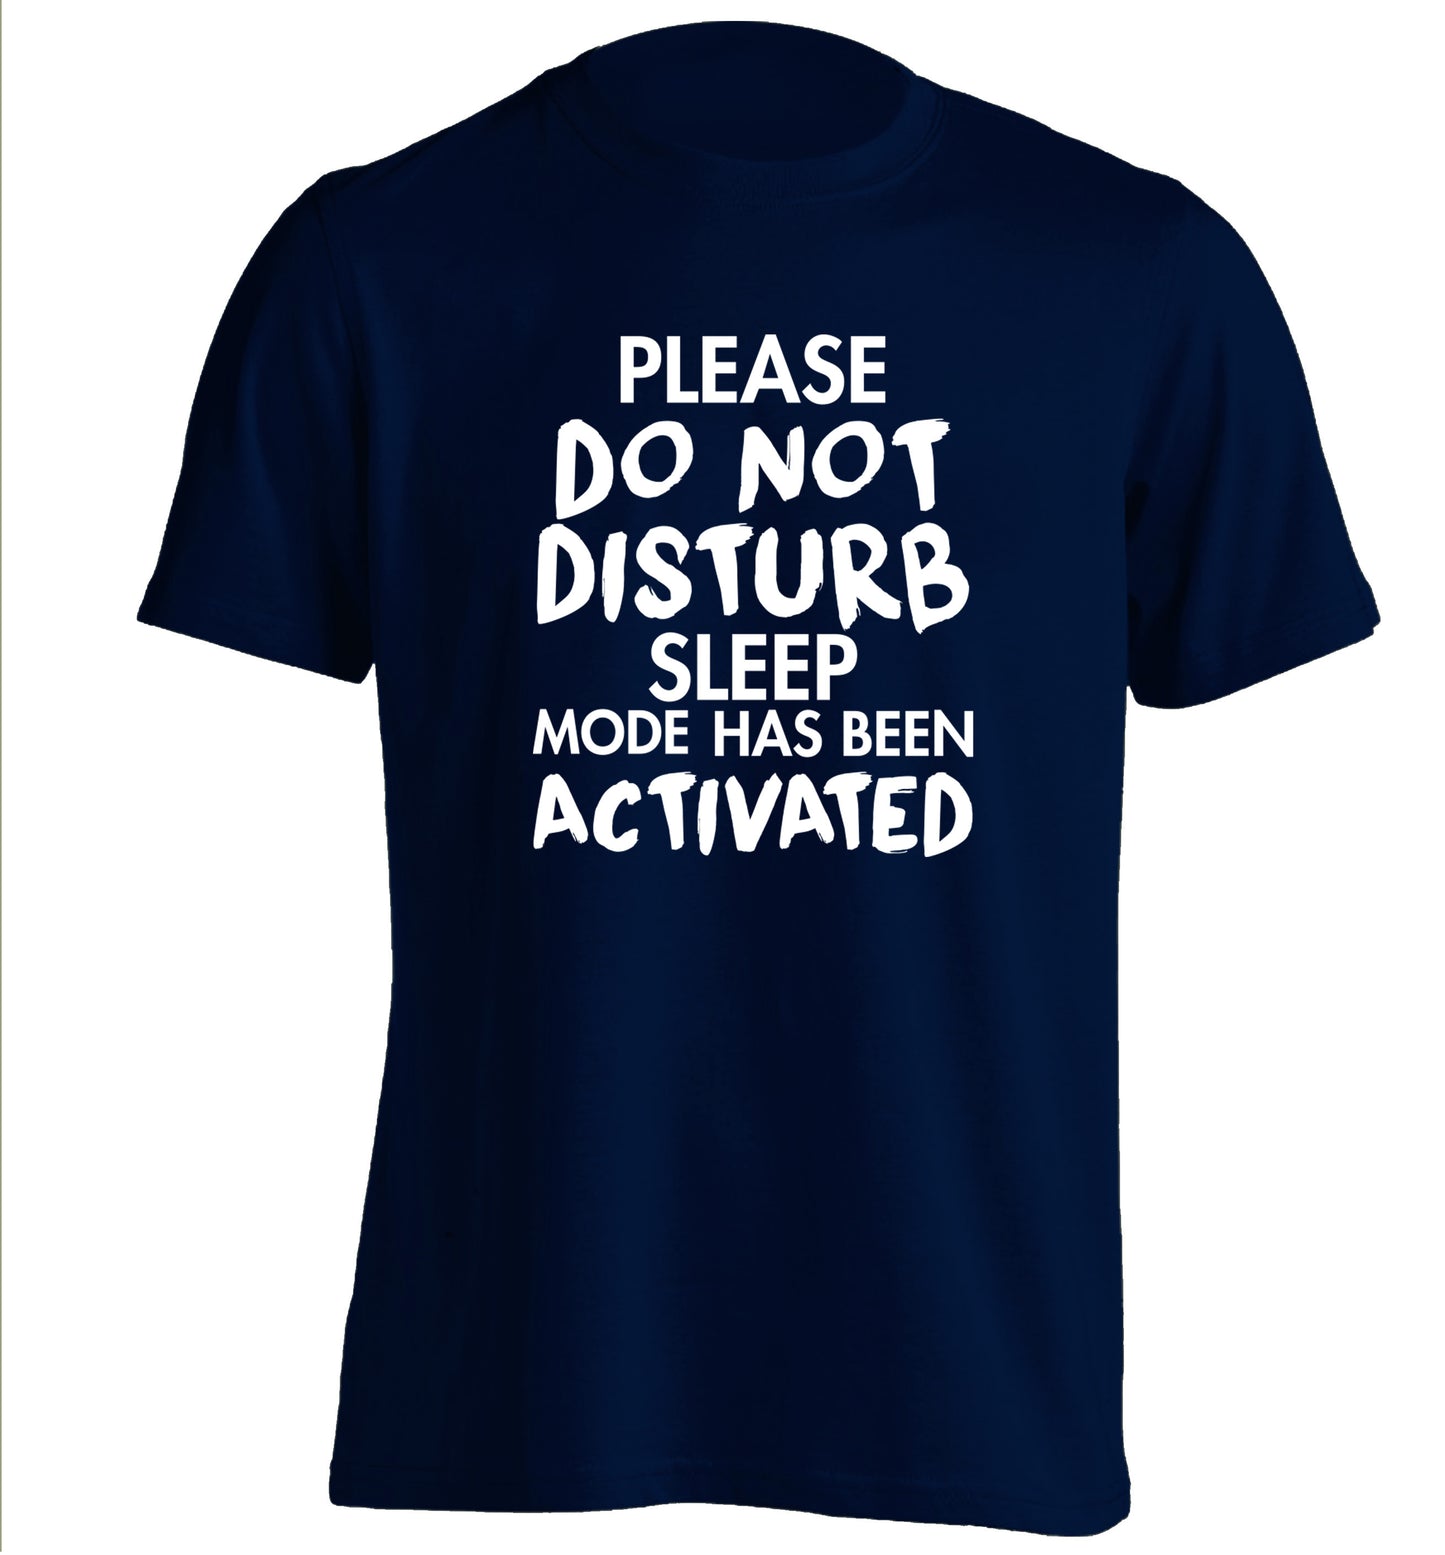 Please do not disturb sleeping mode has been activated adults unisex navy Tshirt 2XL